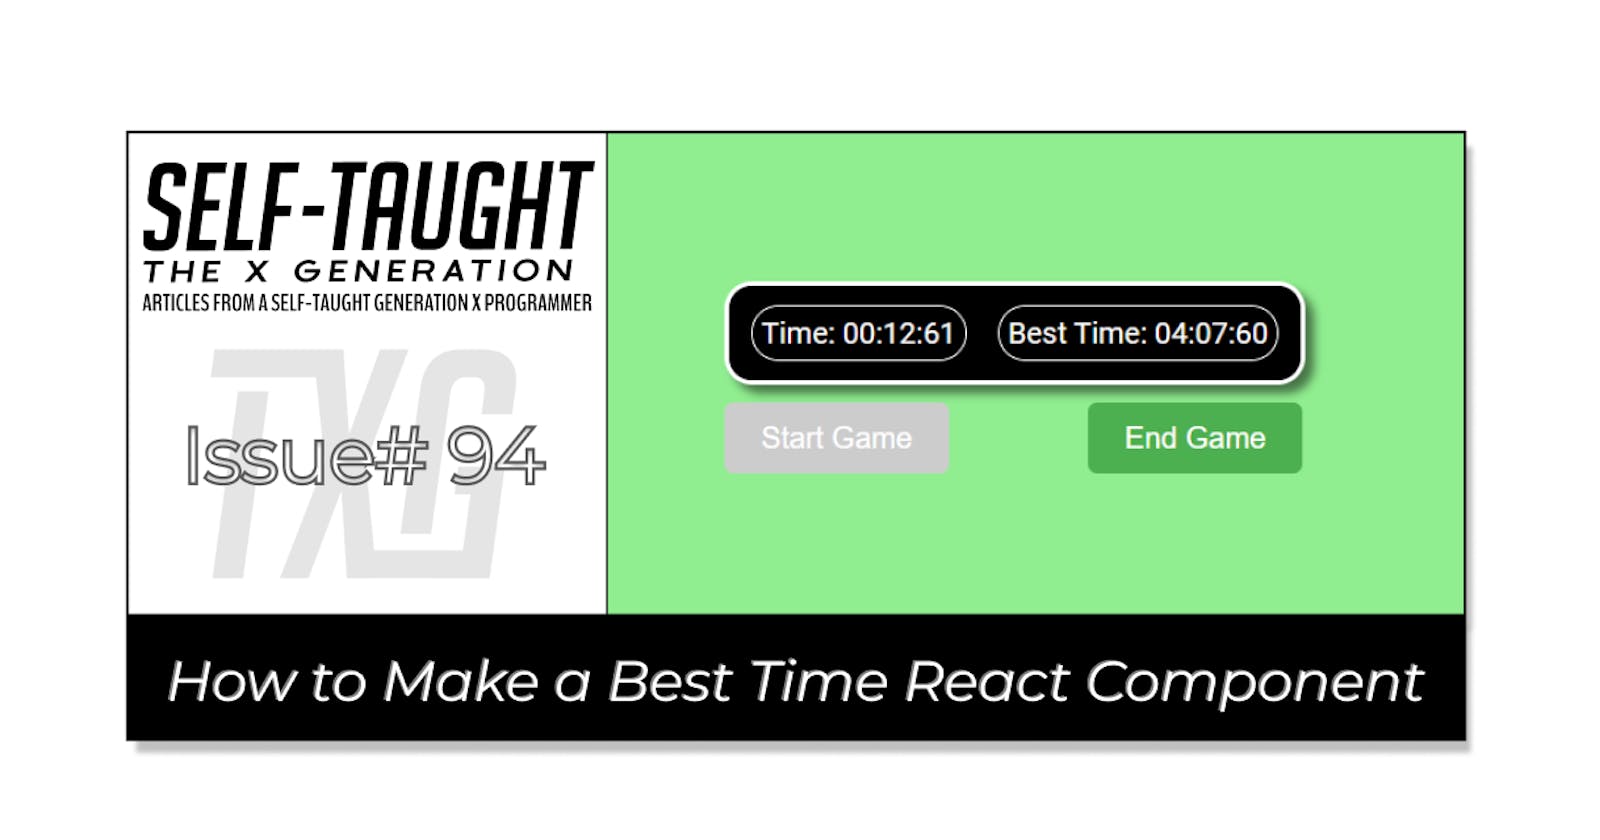 How to Make a Best Time React Component